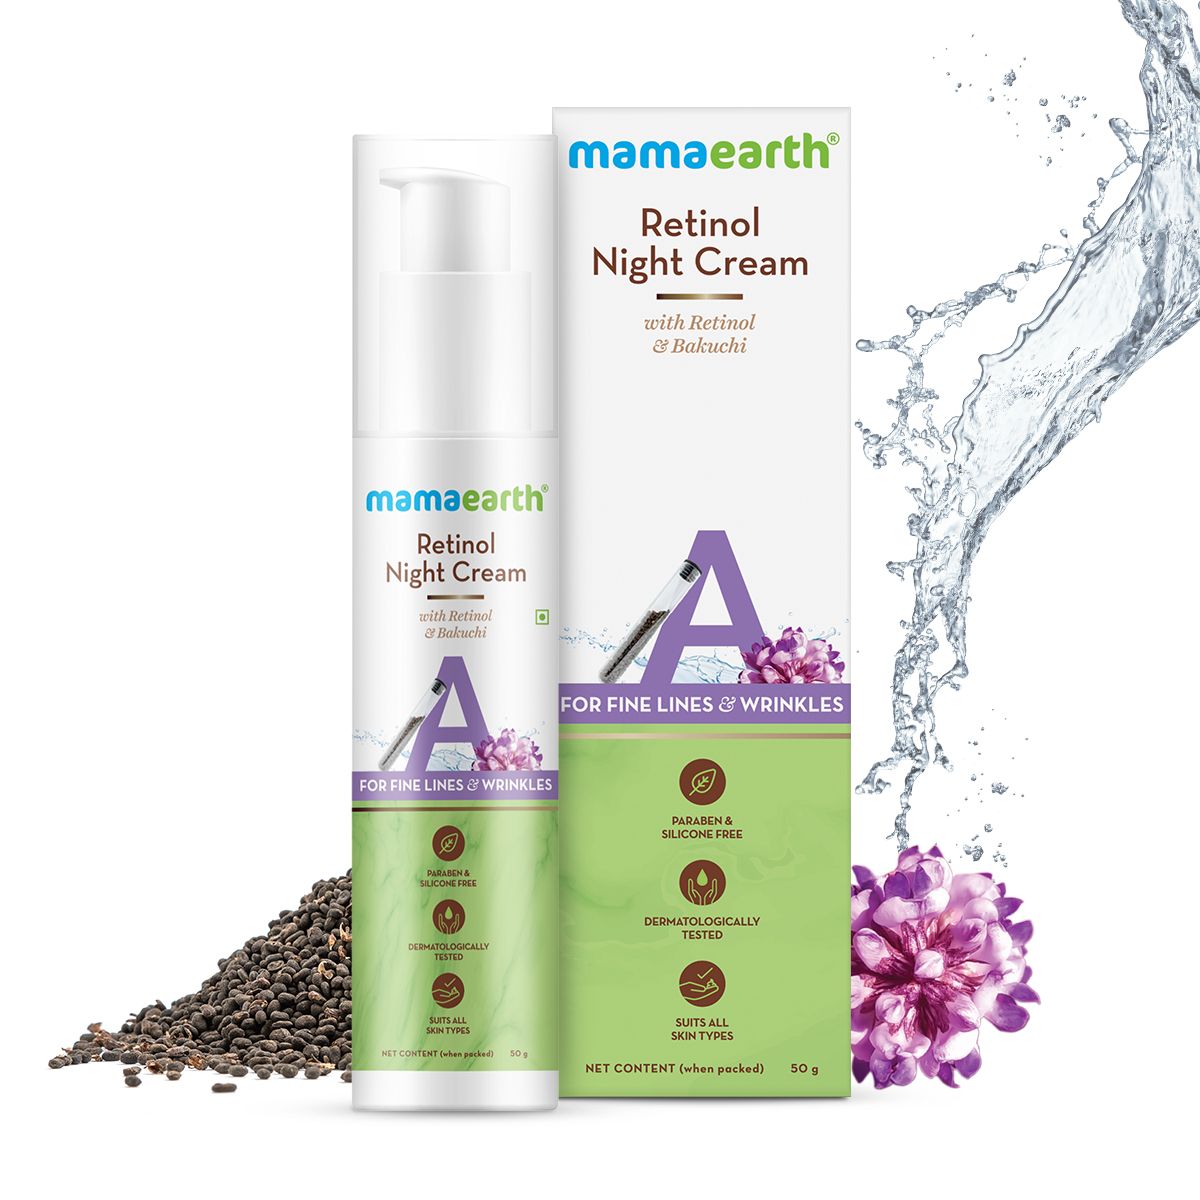 Mamaearth Retinol Night Cream Better Than Others Available in The Market